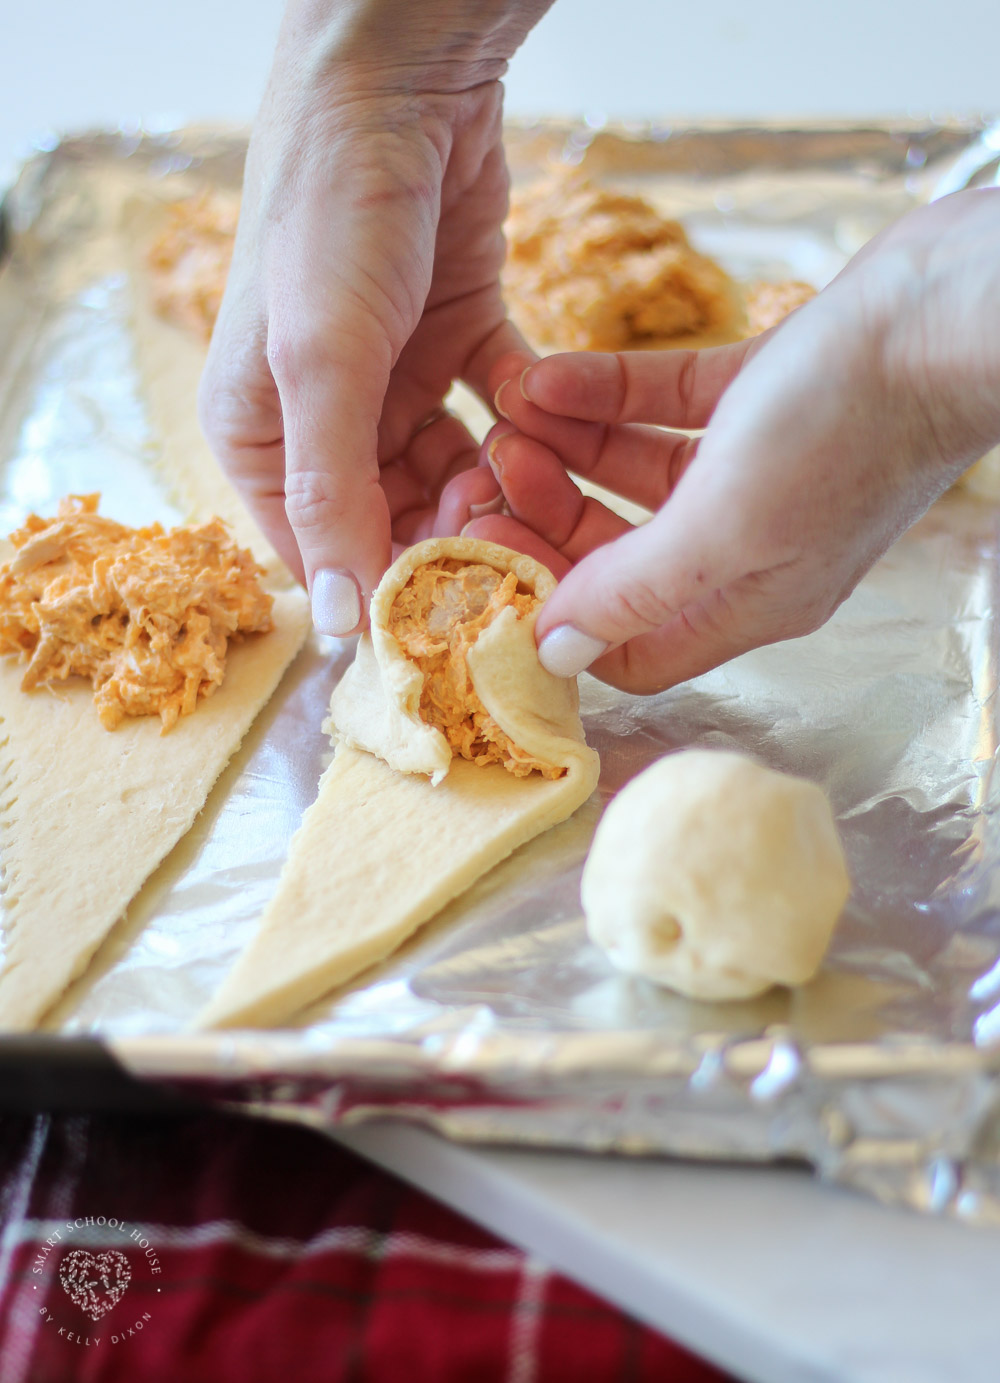 BUFFALO CHICKEN ROLL UPS - Serve up a classic Buffalo chicken appetizer with a crescent twist on Game Day! These could be the ultimate appetizer! #BuffaloChicken #GameDayAppetizer #SuperBowlFood #SuperBowlAppetizer #BuffaloChickenRecipe